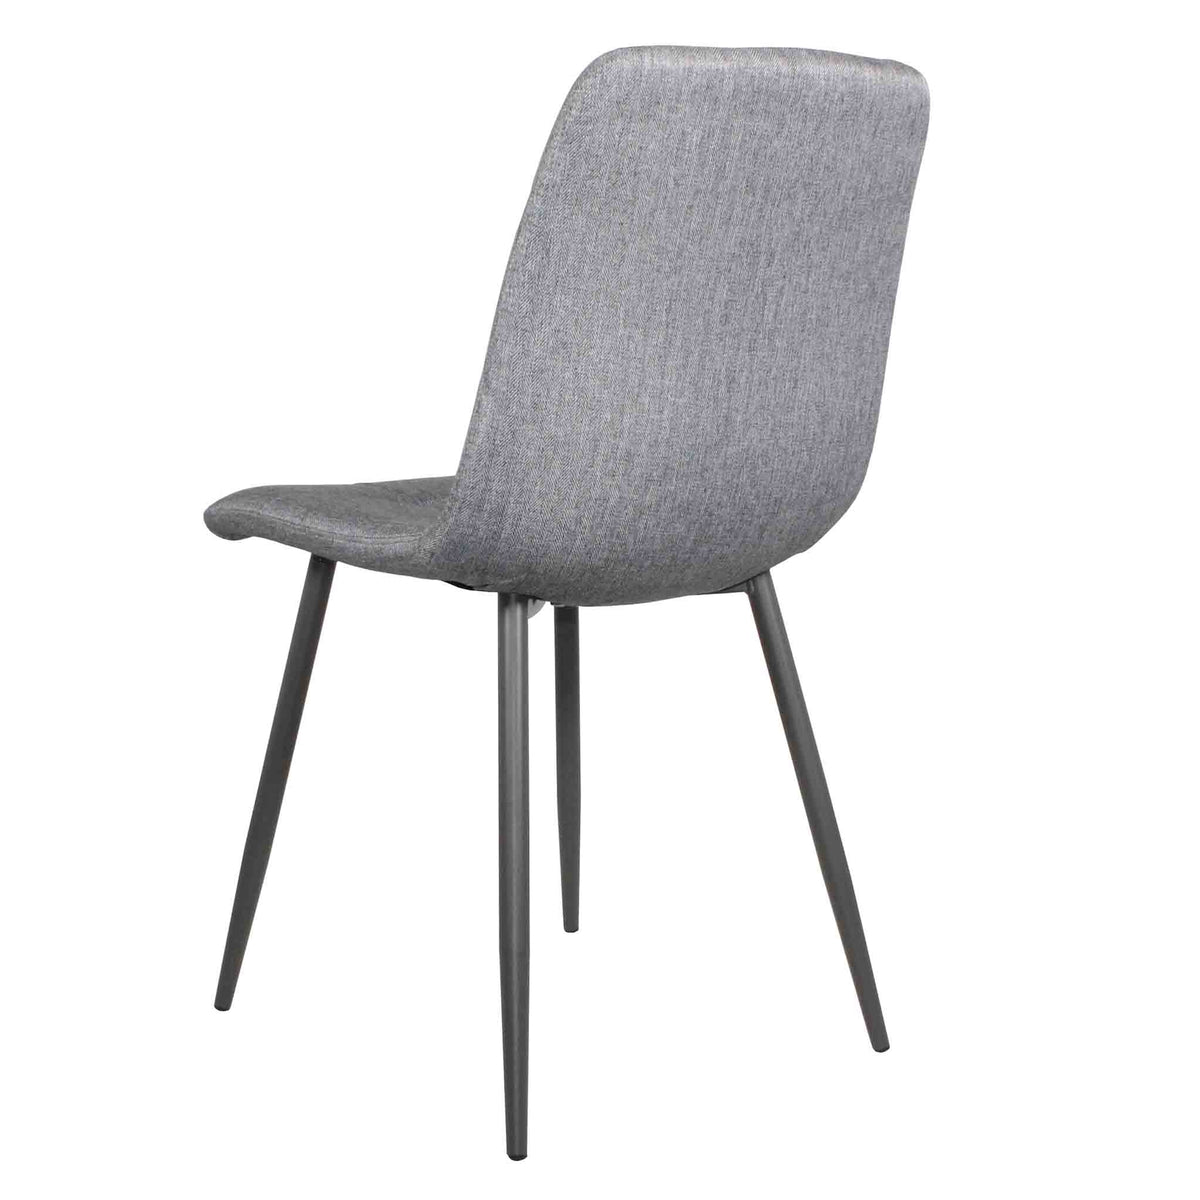 Back view of Olivia Light Grey Faux Leather Padded Dining Chairs